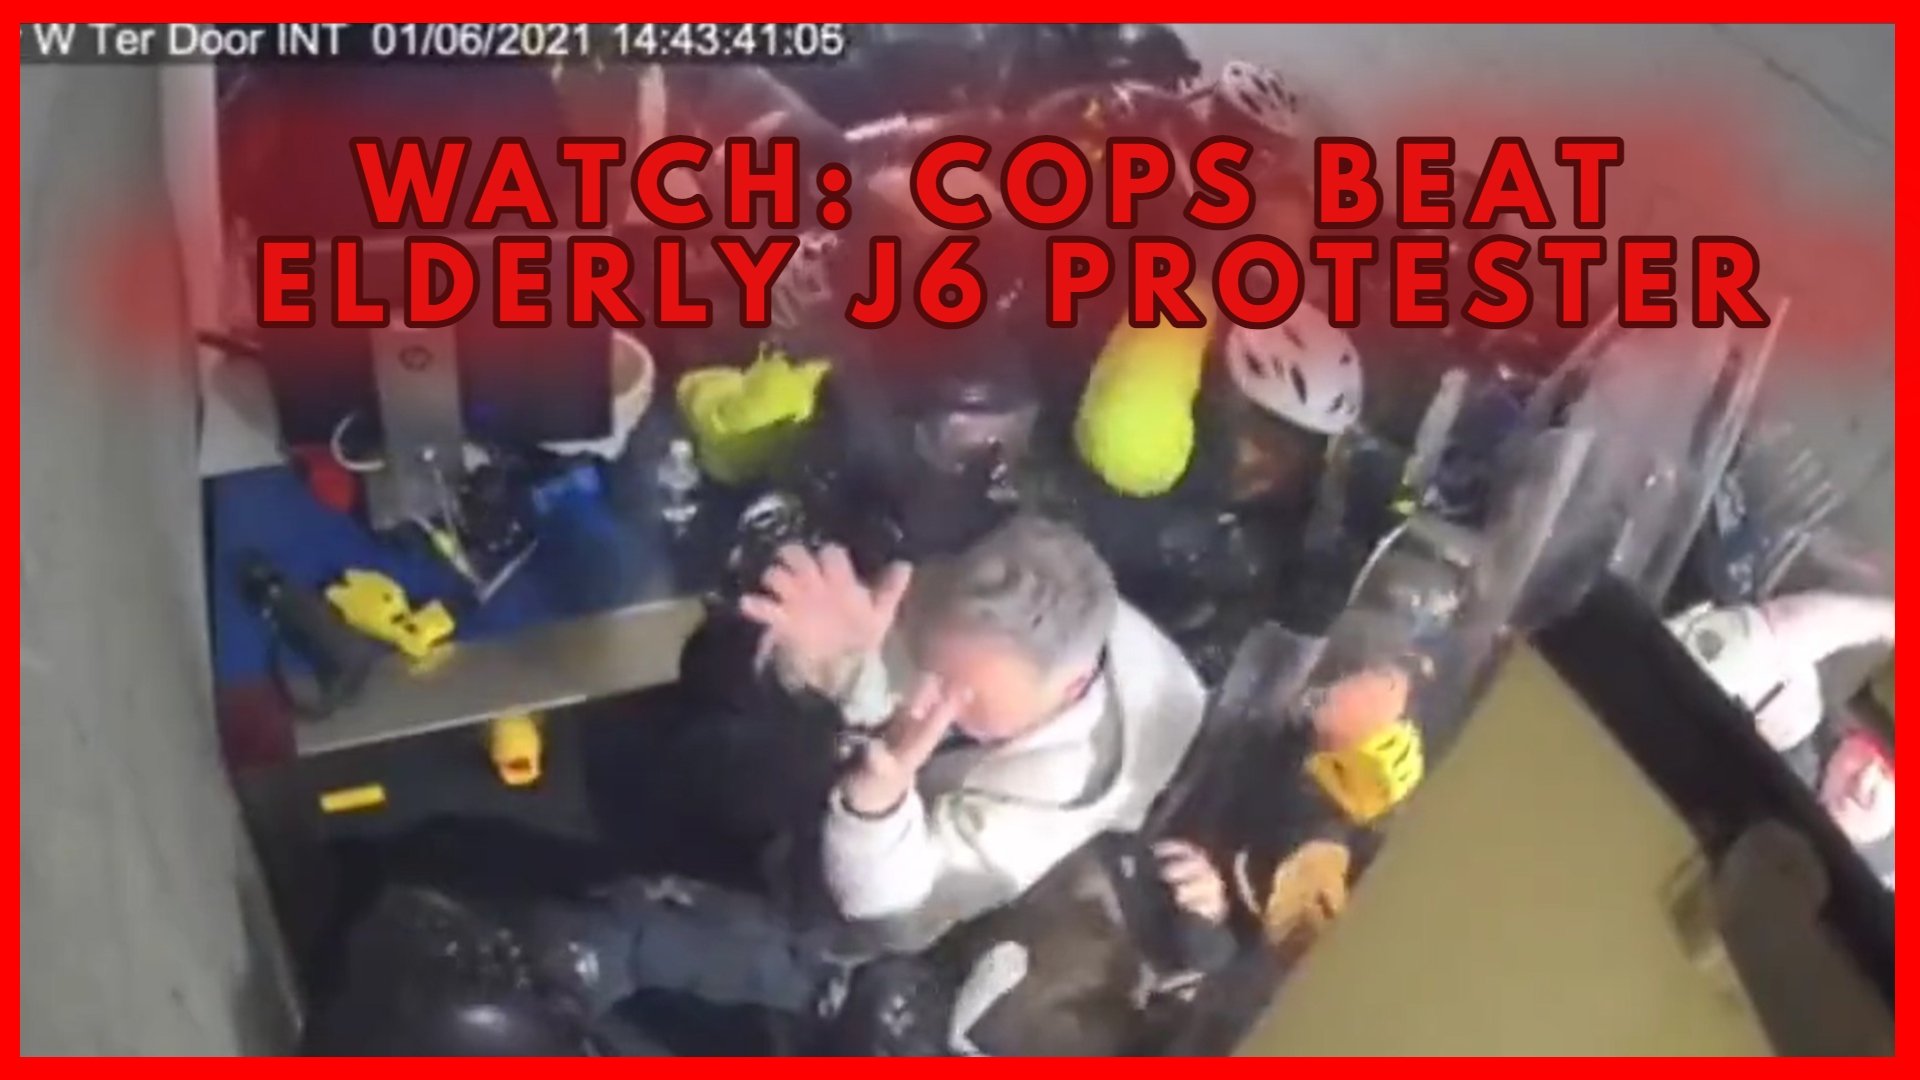 Police Beat The Hell Out Of Innocent J6 Protesters And They Face Years In Prison. The Left Riots, Sues Police For ‘Excessive Force’ And Wins Millions